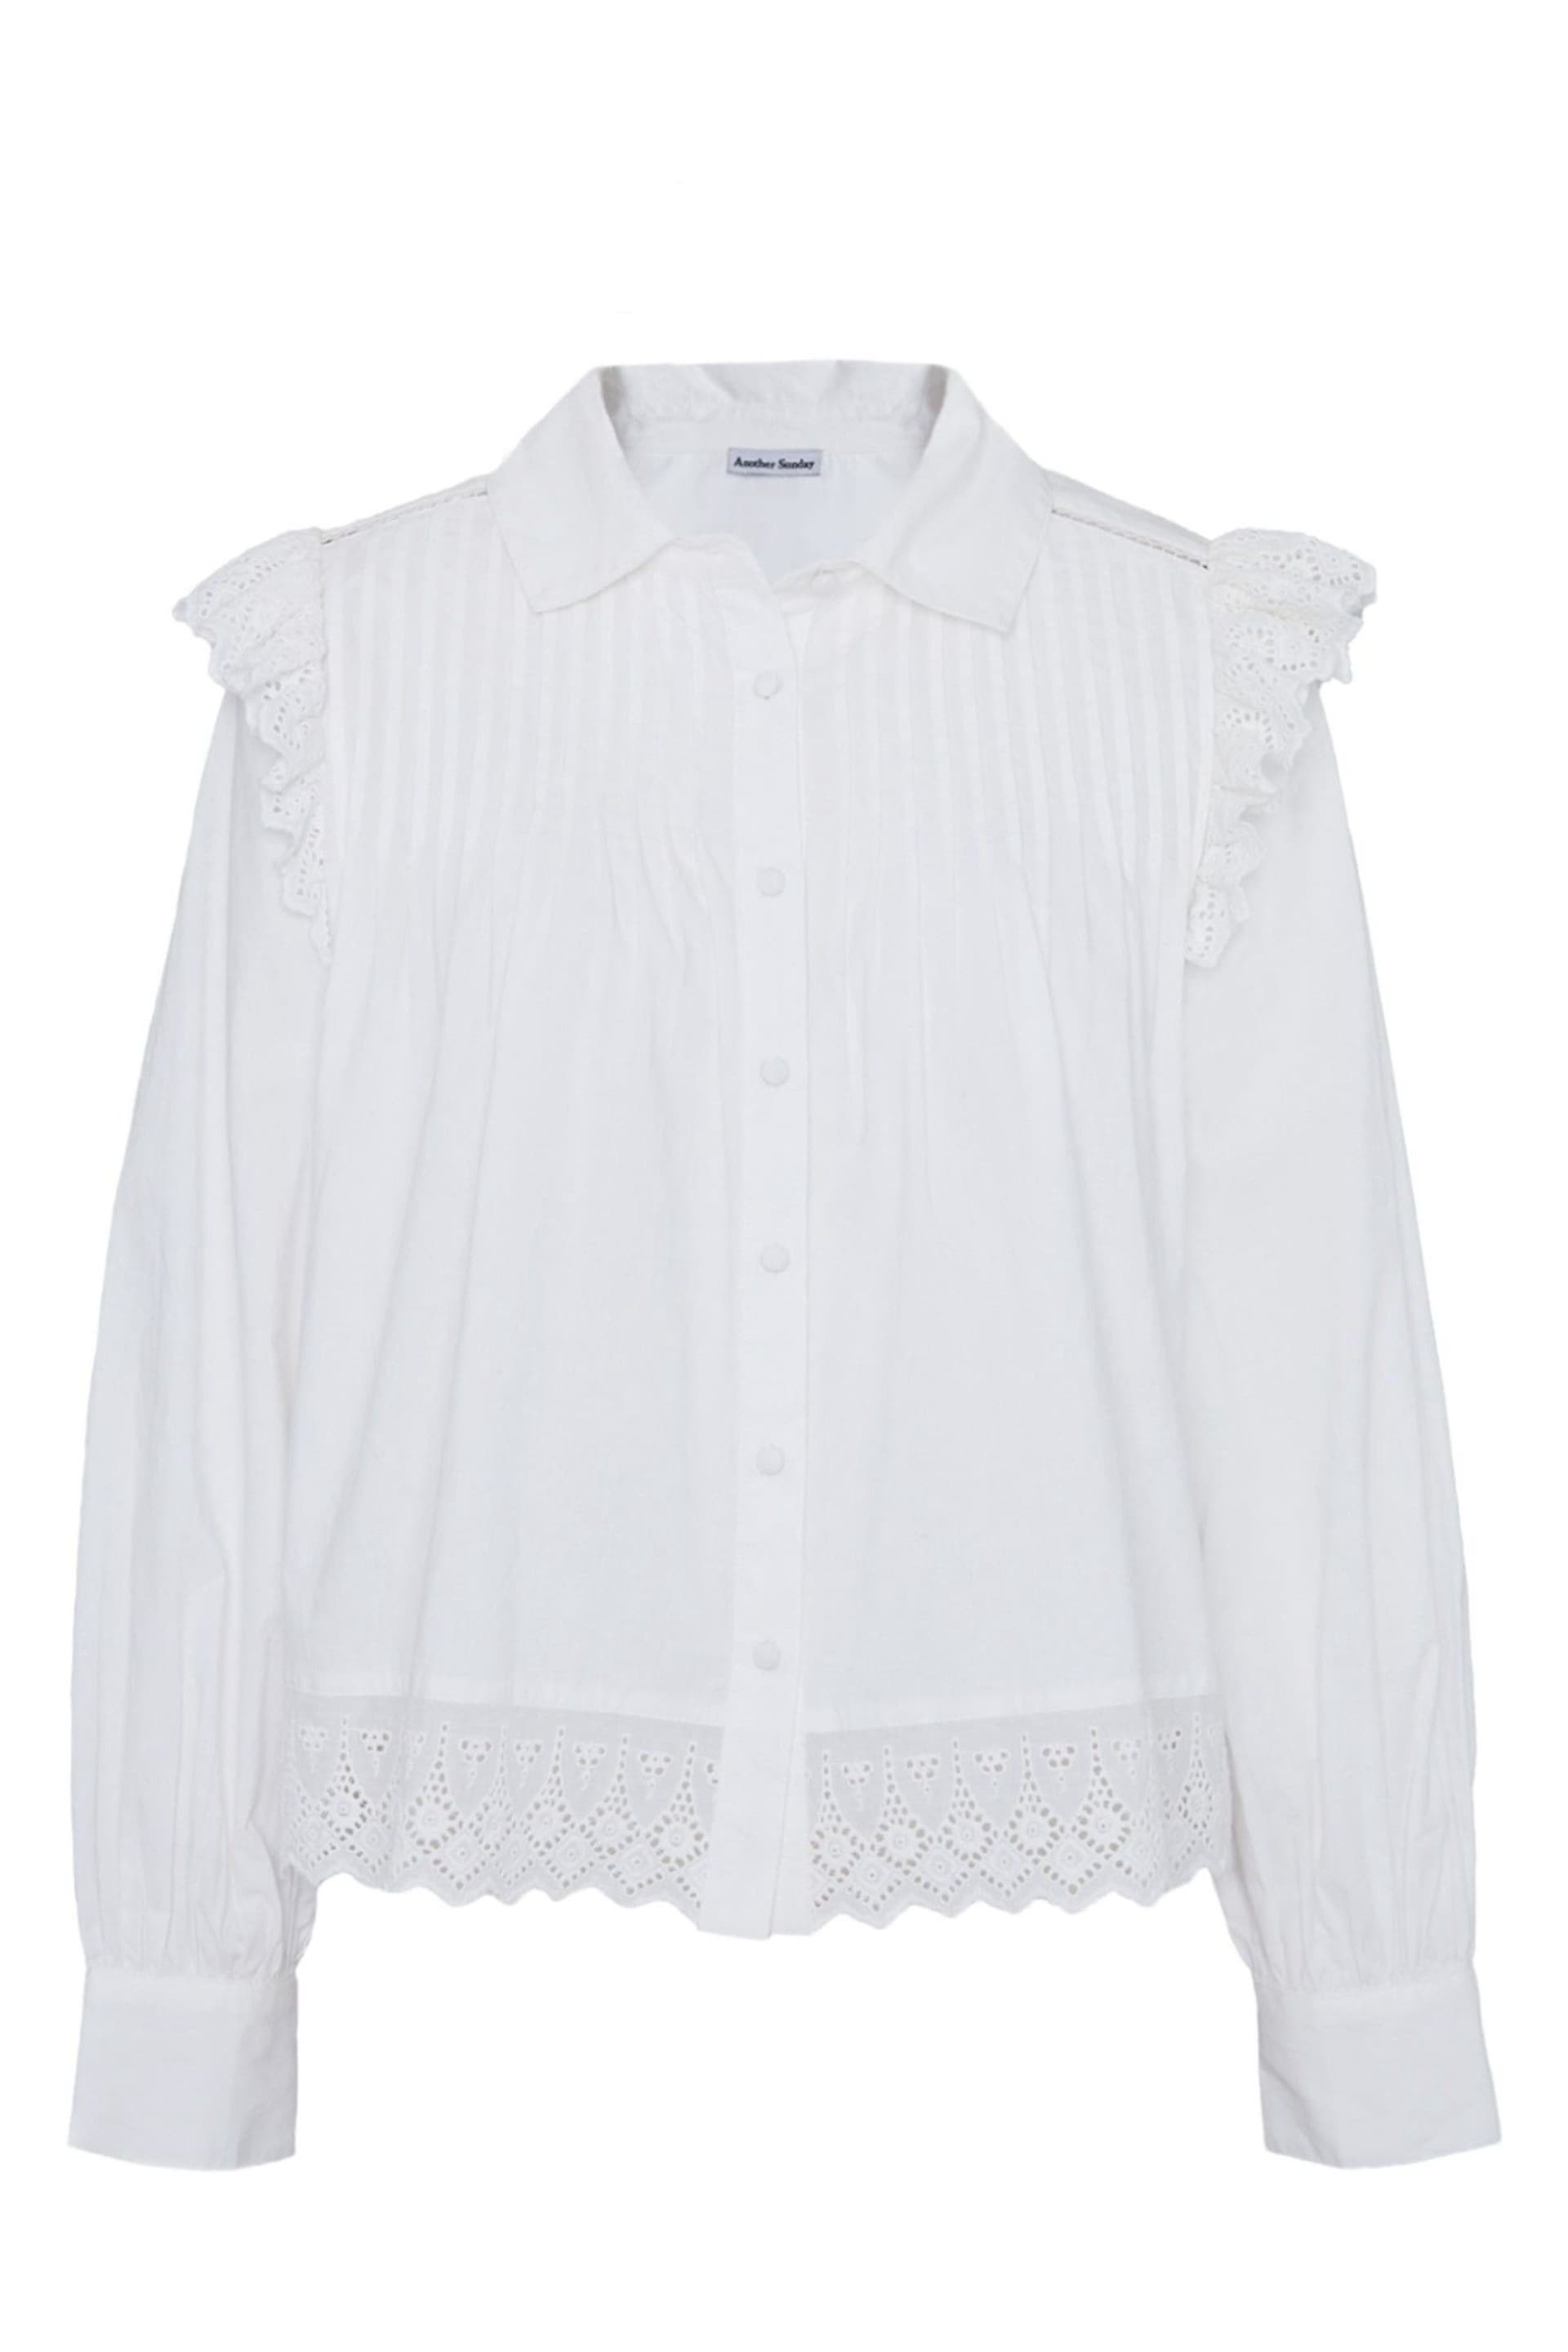 Another Sunday Pintuck Detail Lace Trim White Shirt - Image 4 of 6